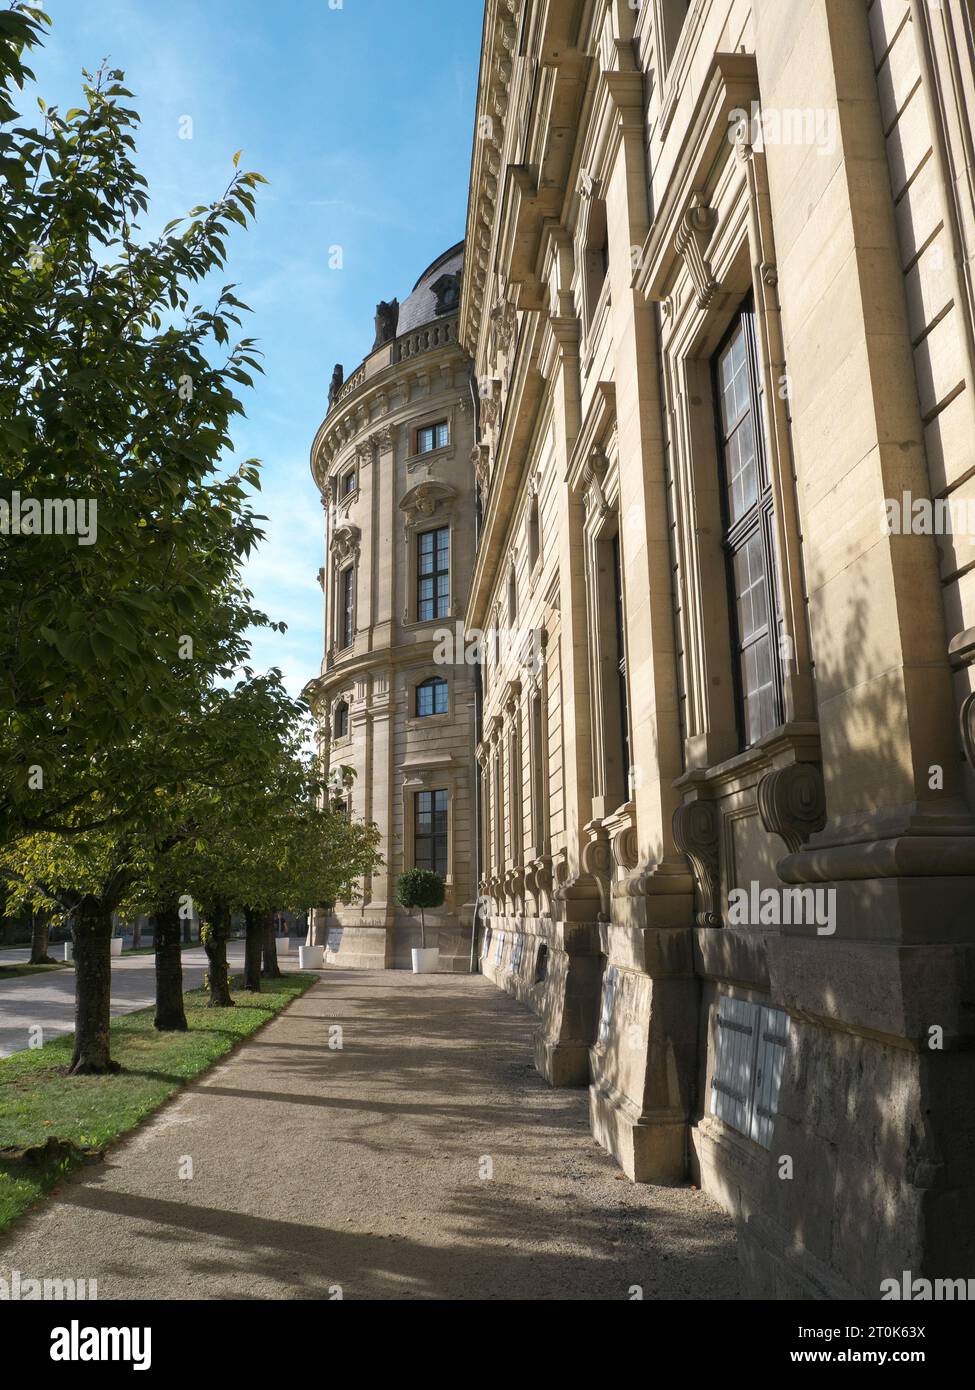 Magnificent baroque facade of the Würzburg Residence Stock Photo